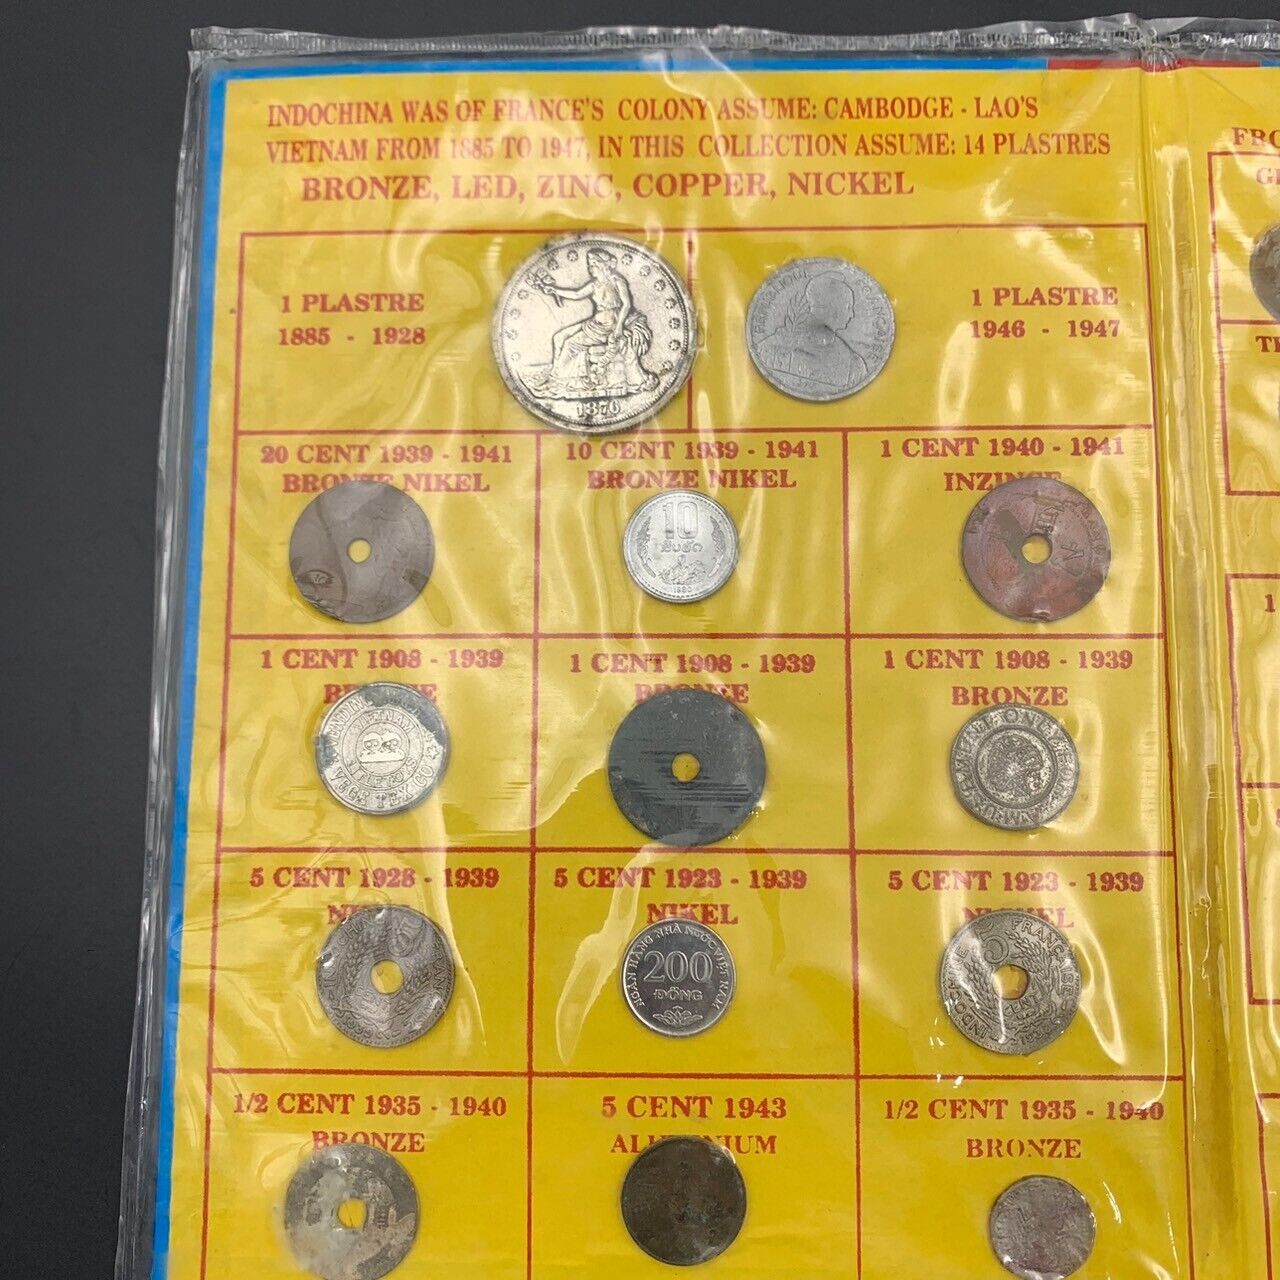 Indochine-Annam Vietnam Antique & Vintage Coins Collection Book, 34 Coins - Image 2 of 8